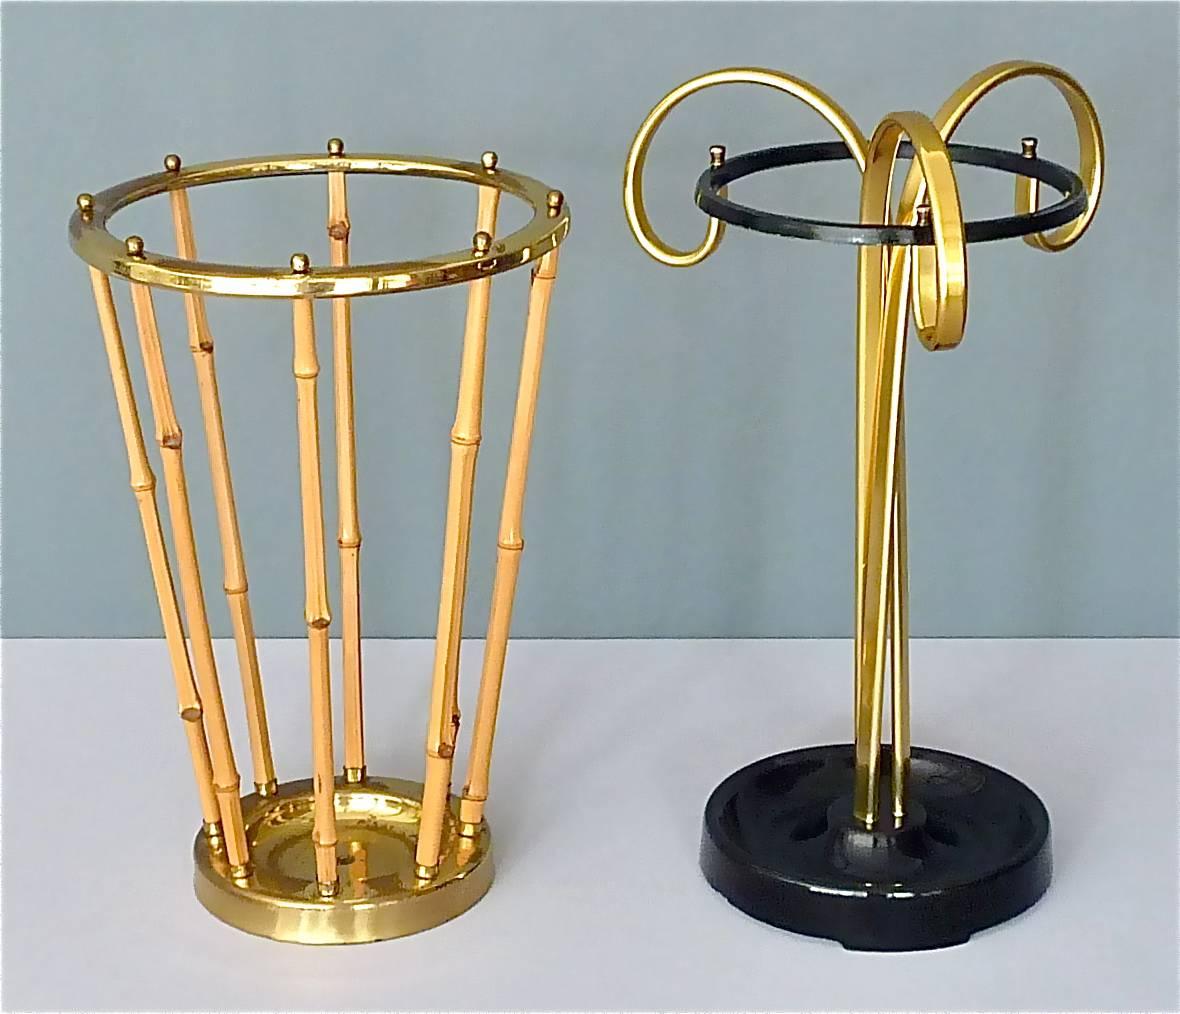 Midcentury Austrian Umbrella Stand Patinated Brass Bamboo Josef Frank Style 1950 For Sale 10